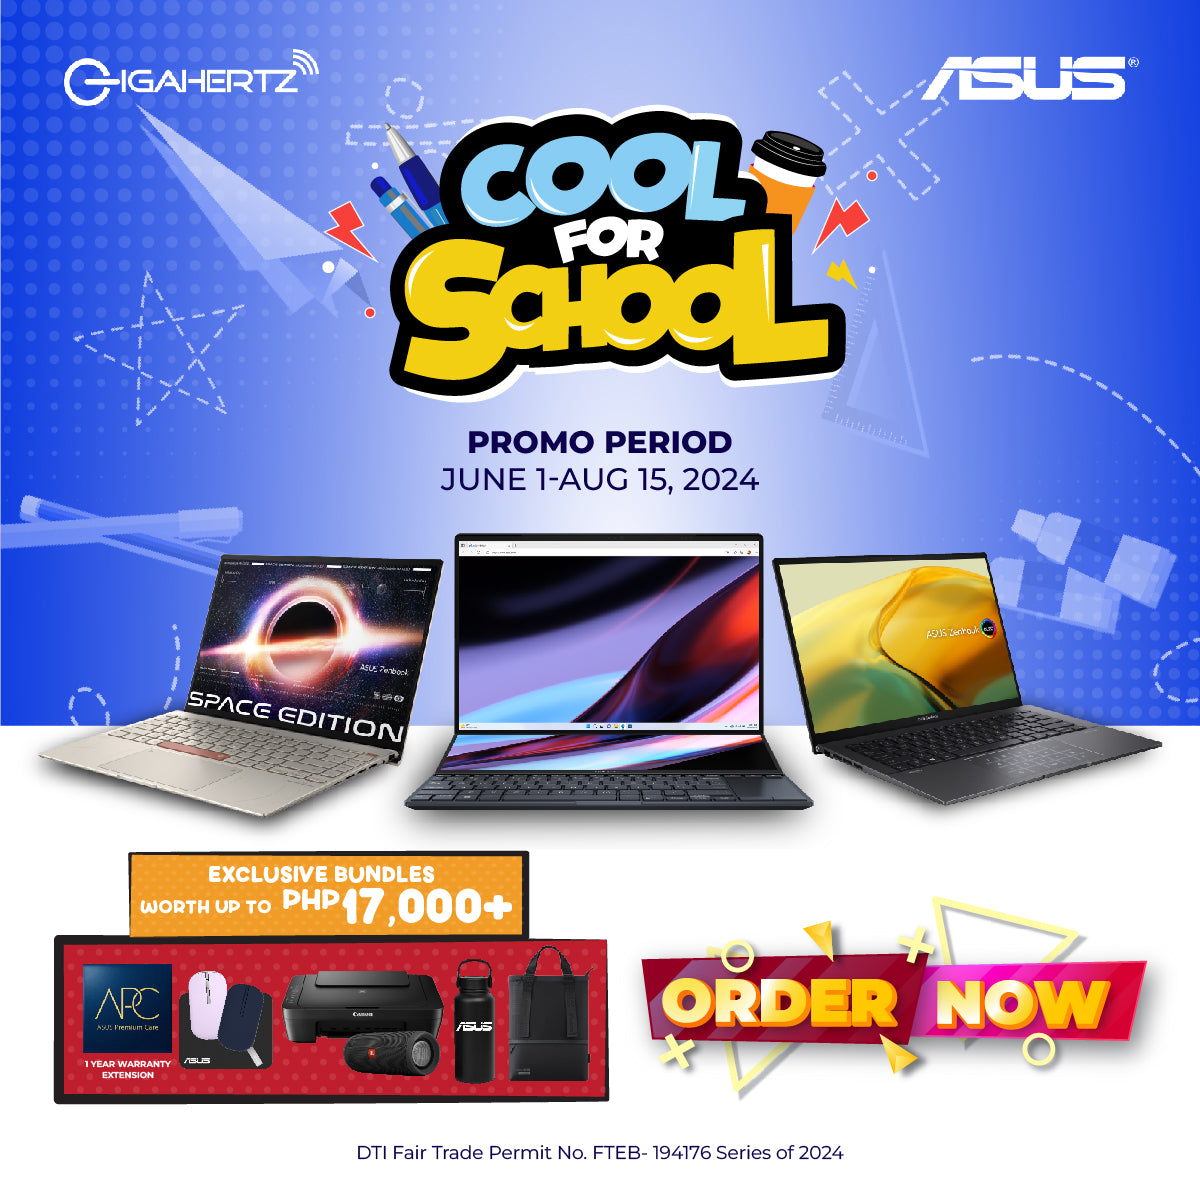 Laptop sale Philippines | Affordable laptops for school | Tech gadgets for students | Back to school | Gigahertz